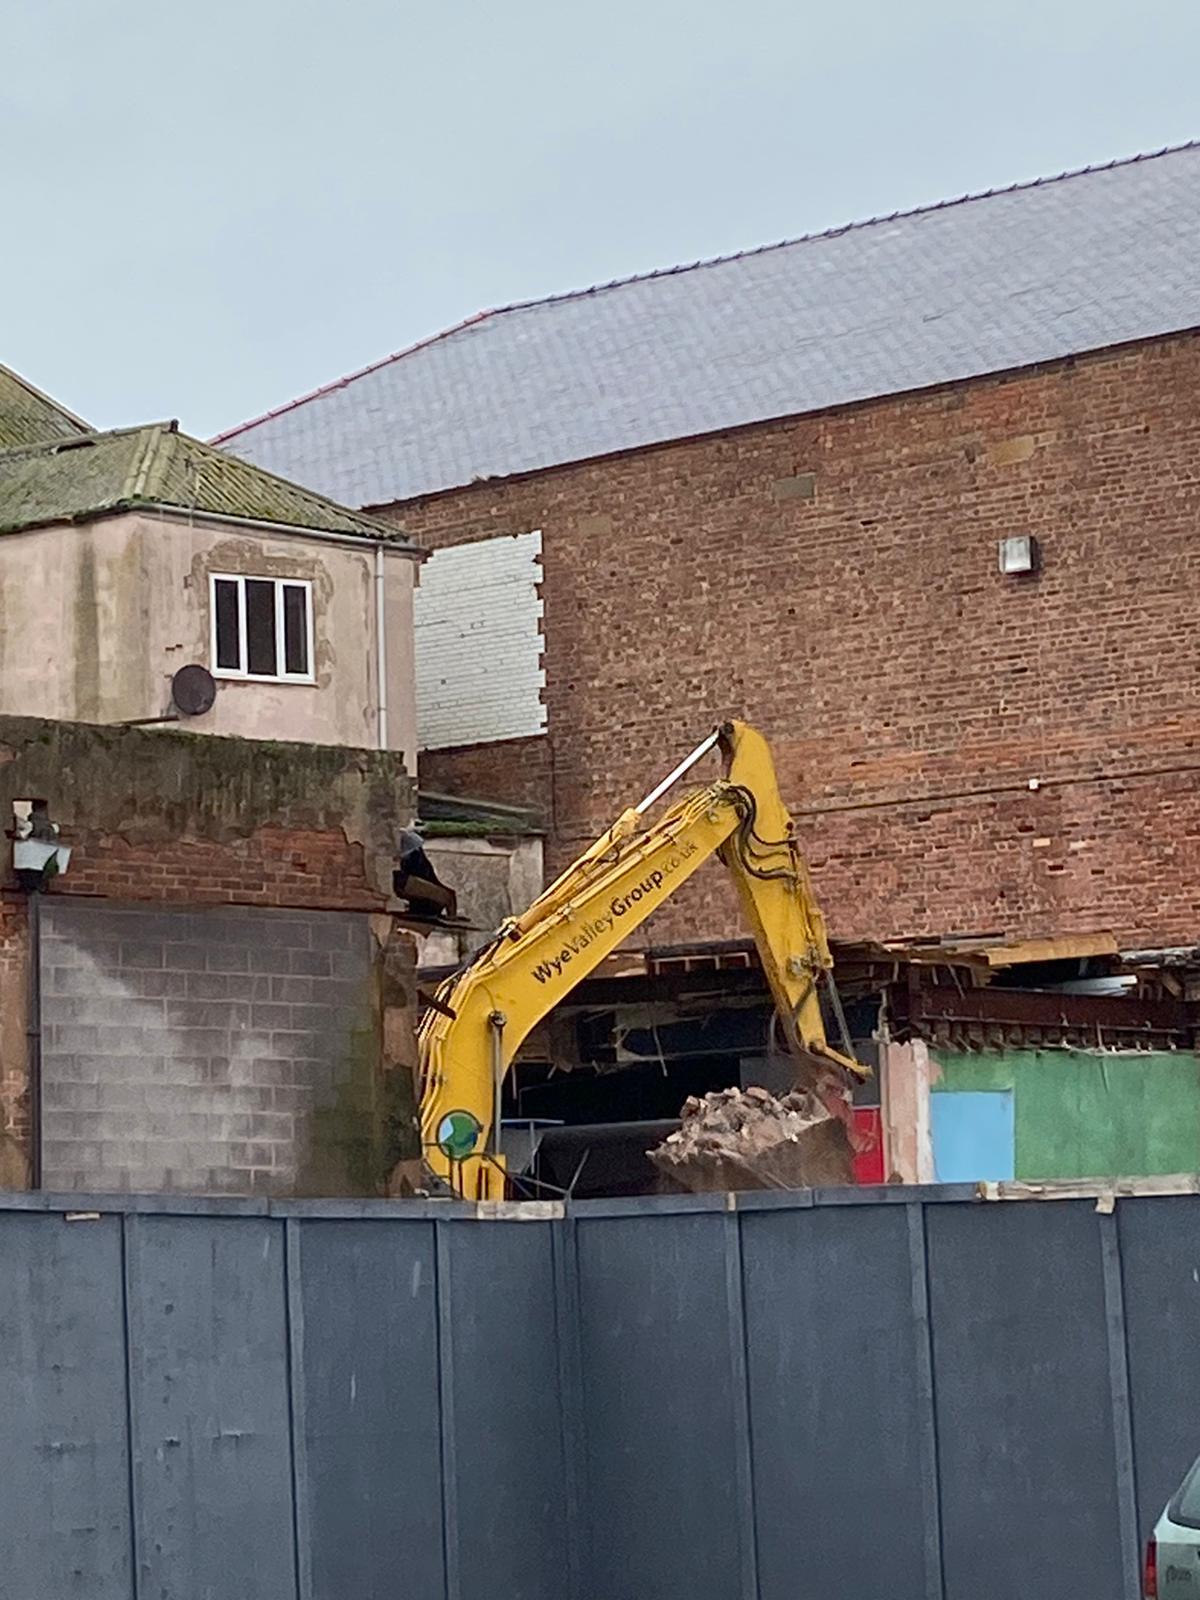 Demolition work taking place on site January 2021. Picture: Jasmine Hemmings